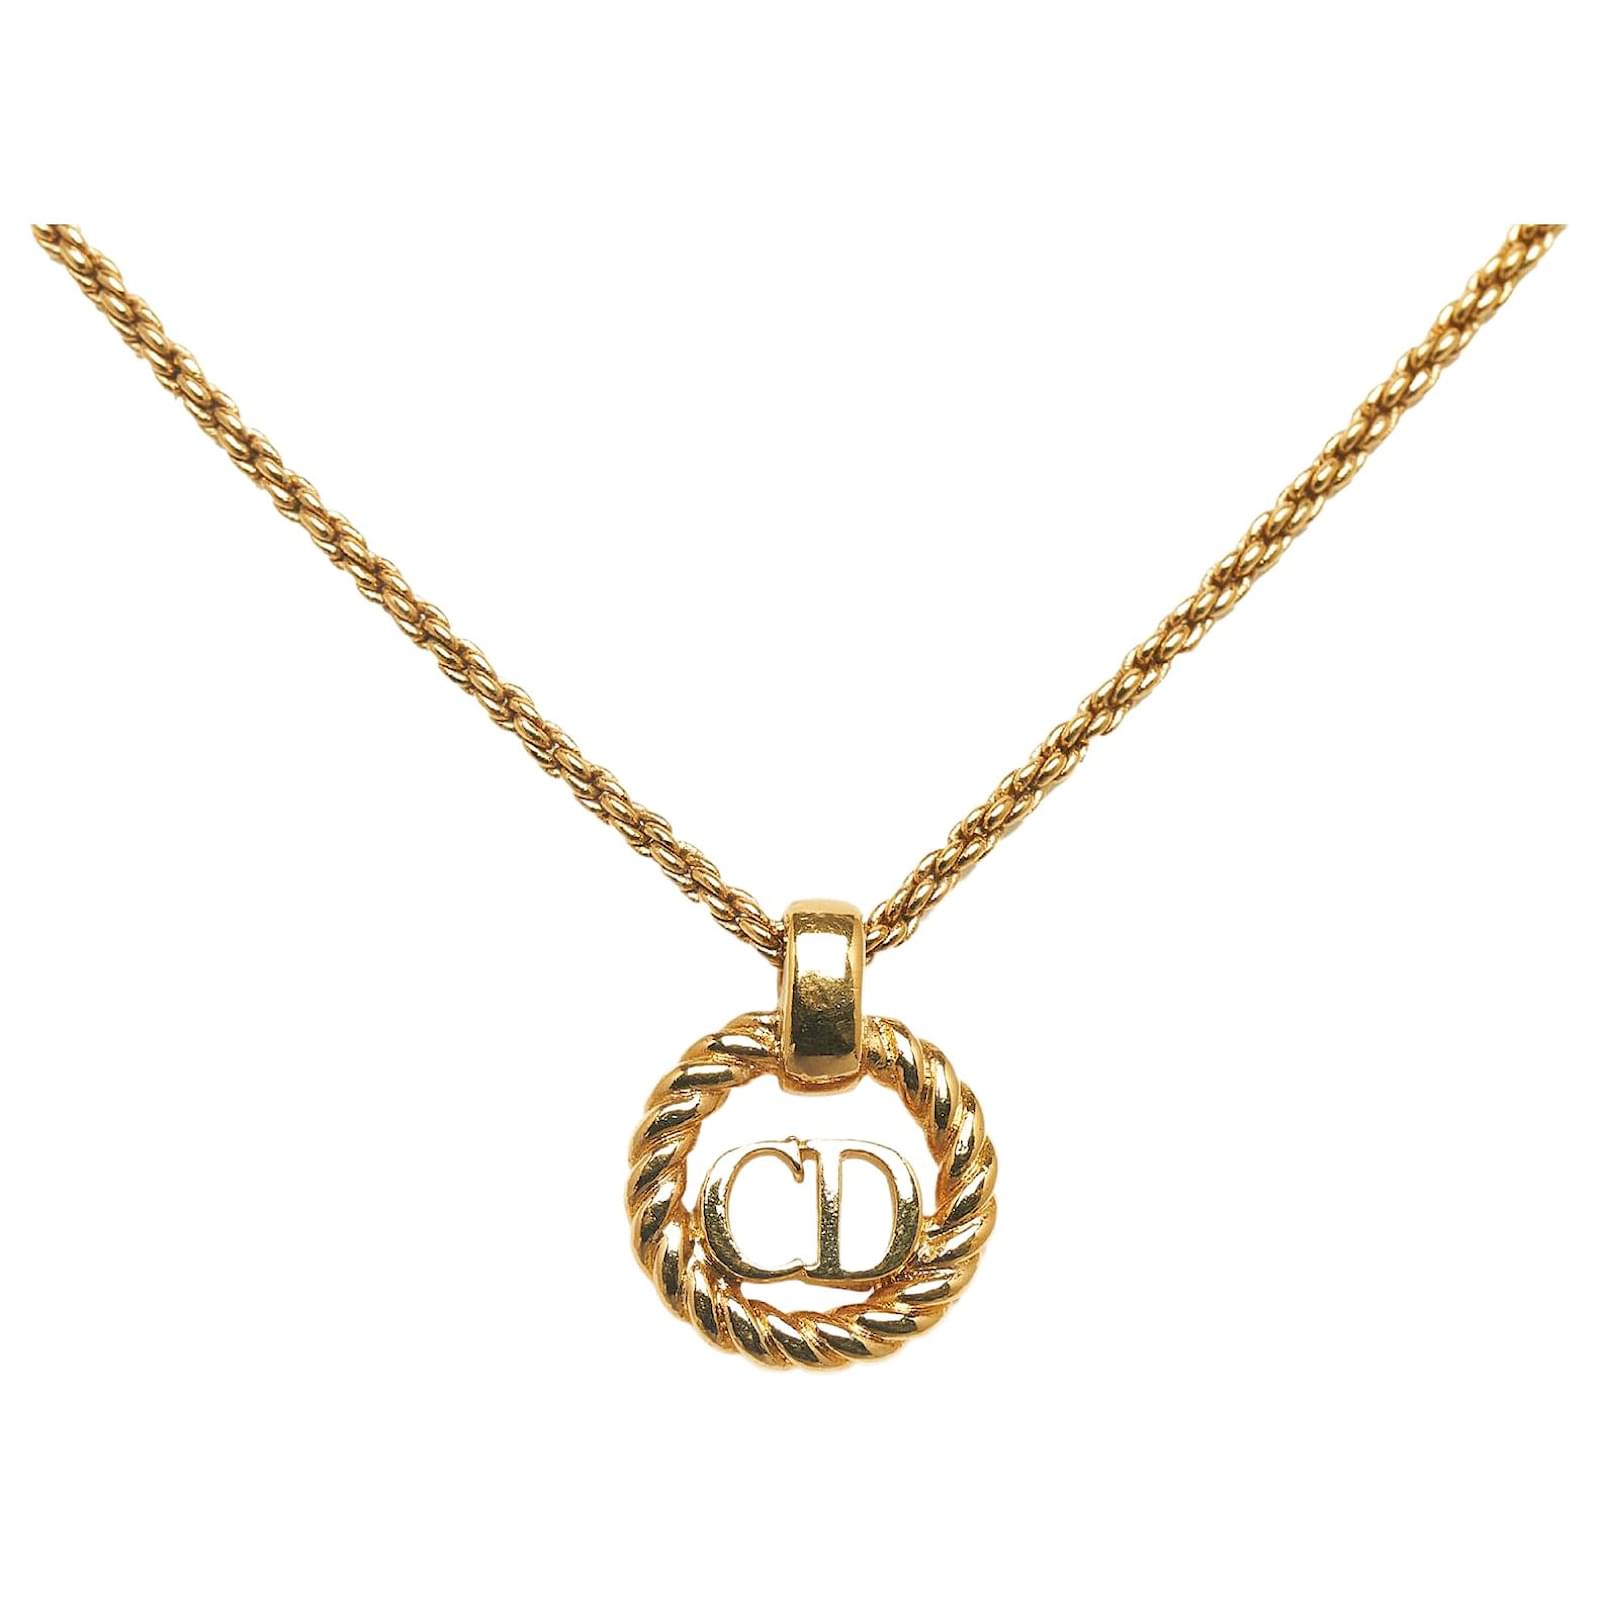 CHRISTIAN DIOR Metal CD Necklace Gold 1216527 | FASHIONPHILE